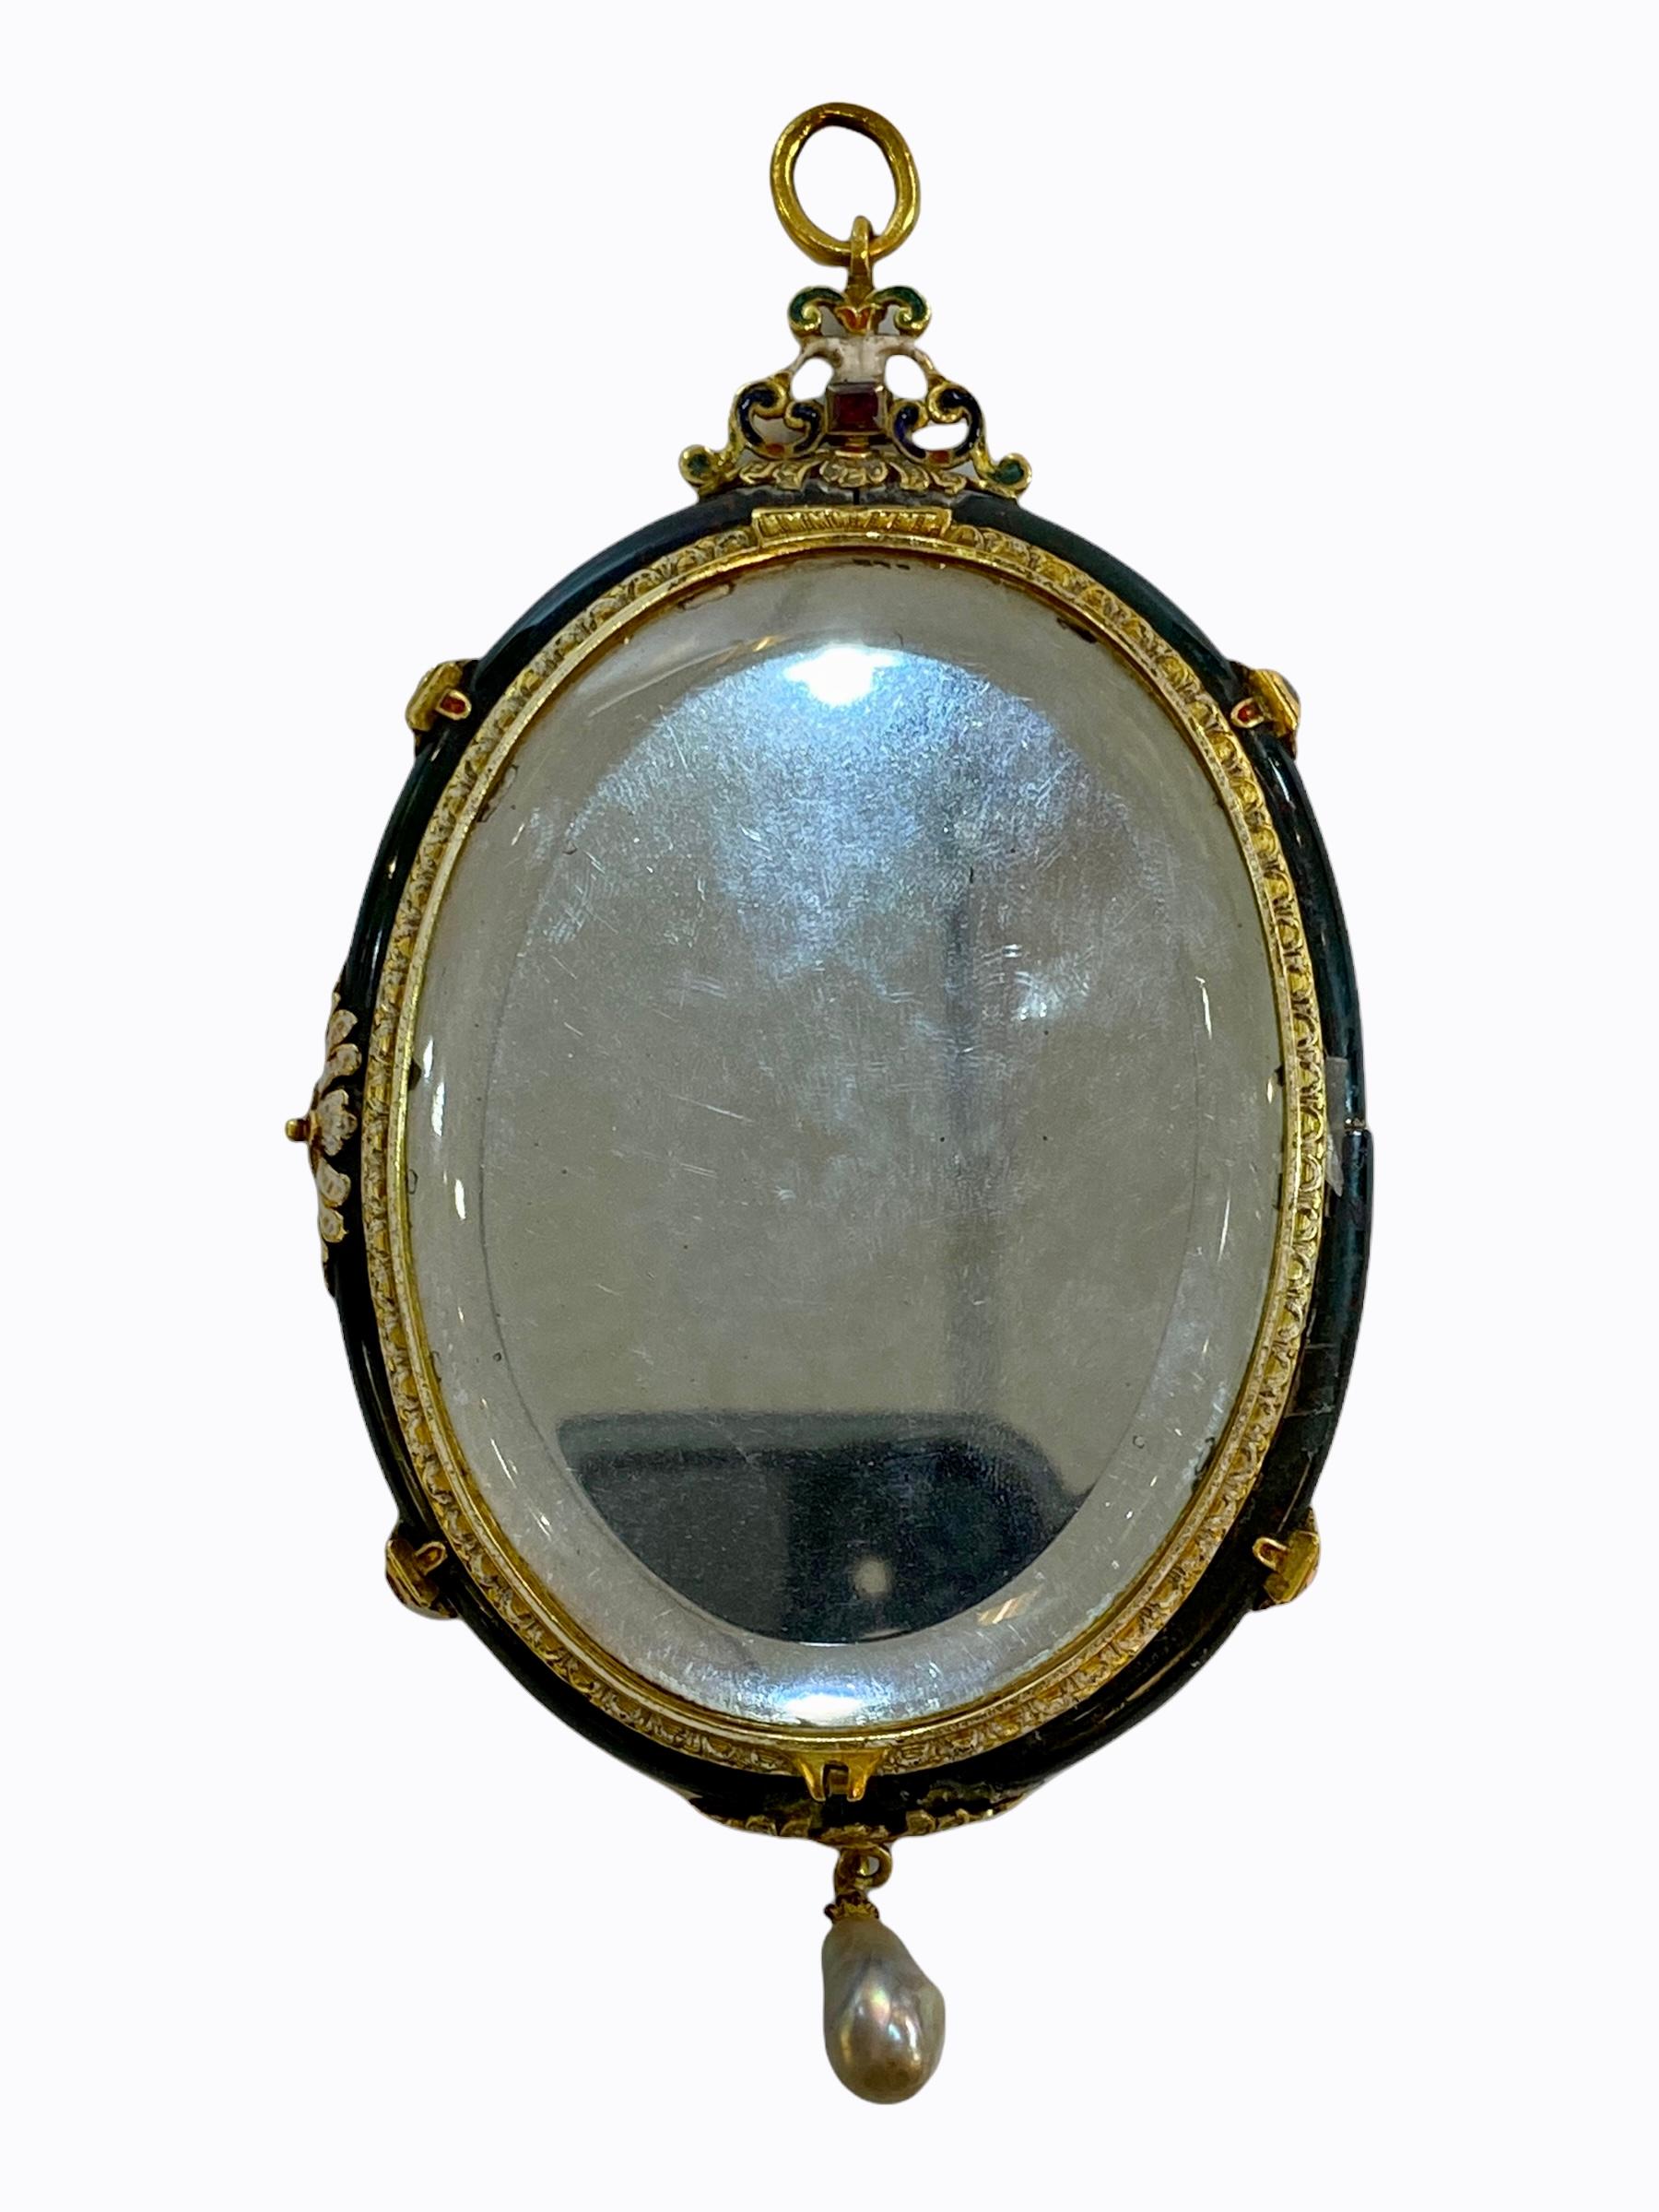 Our antique neoclassical hand mirror, designed as a pendant to hang from a necklace, with exceptional enameled back and gilded designs in the medieval style includes a banner that reads VT VIDI VT PERII in Latin which translates to As I Saw, I